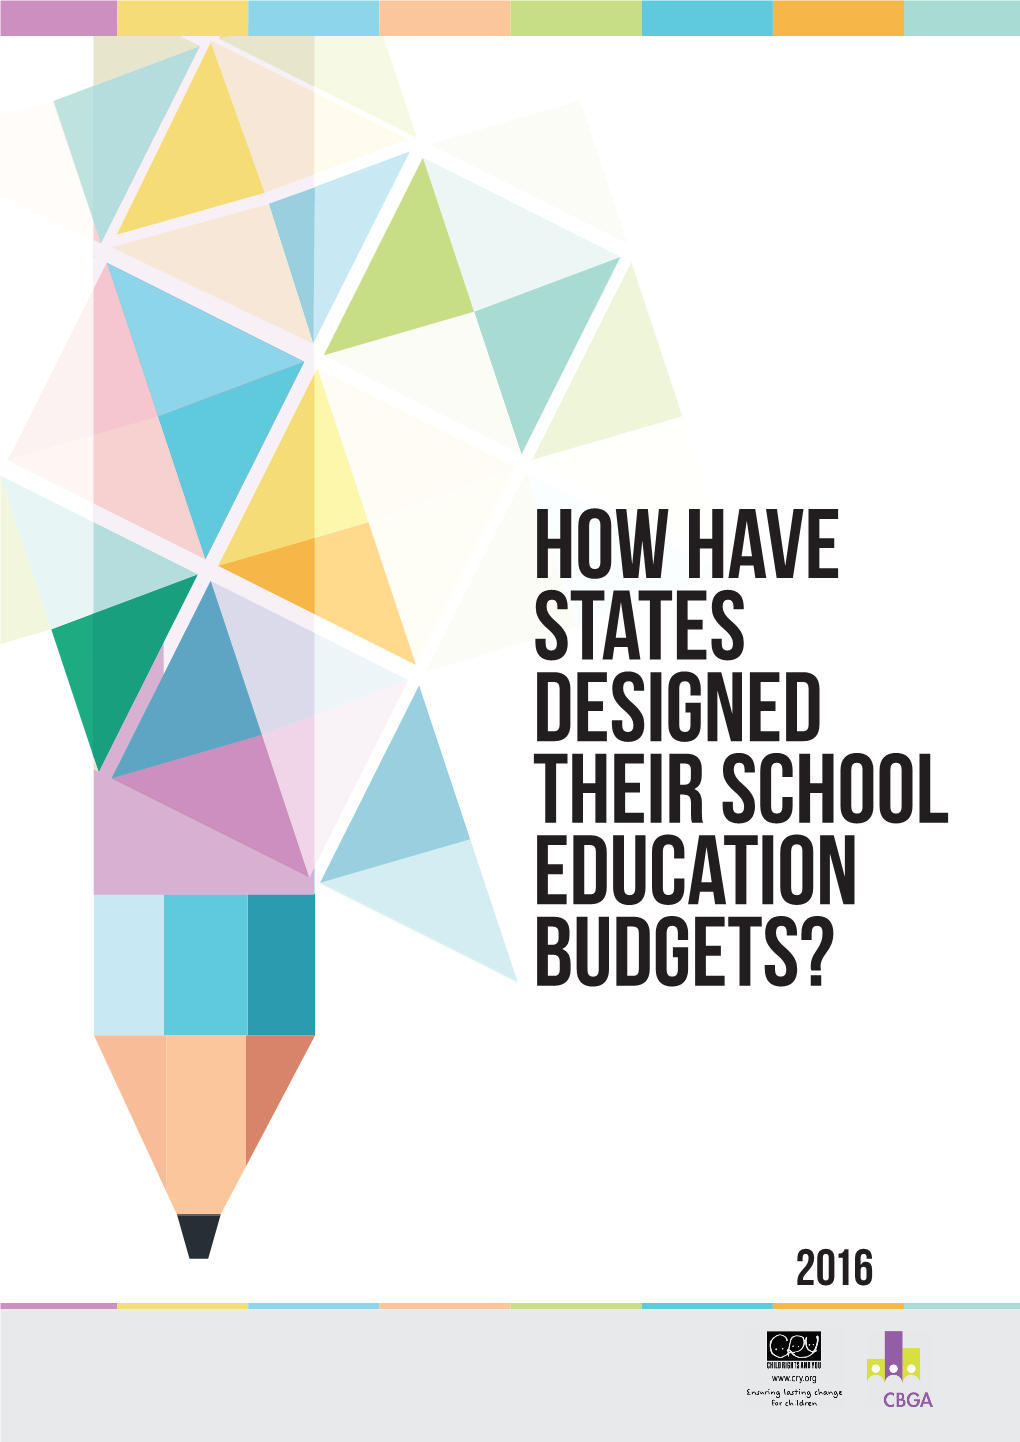 How Have States Designed Their School Education Budgets?